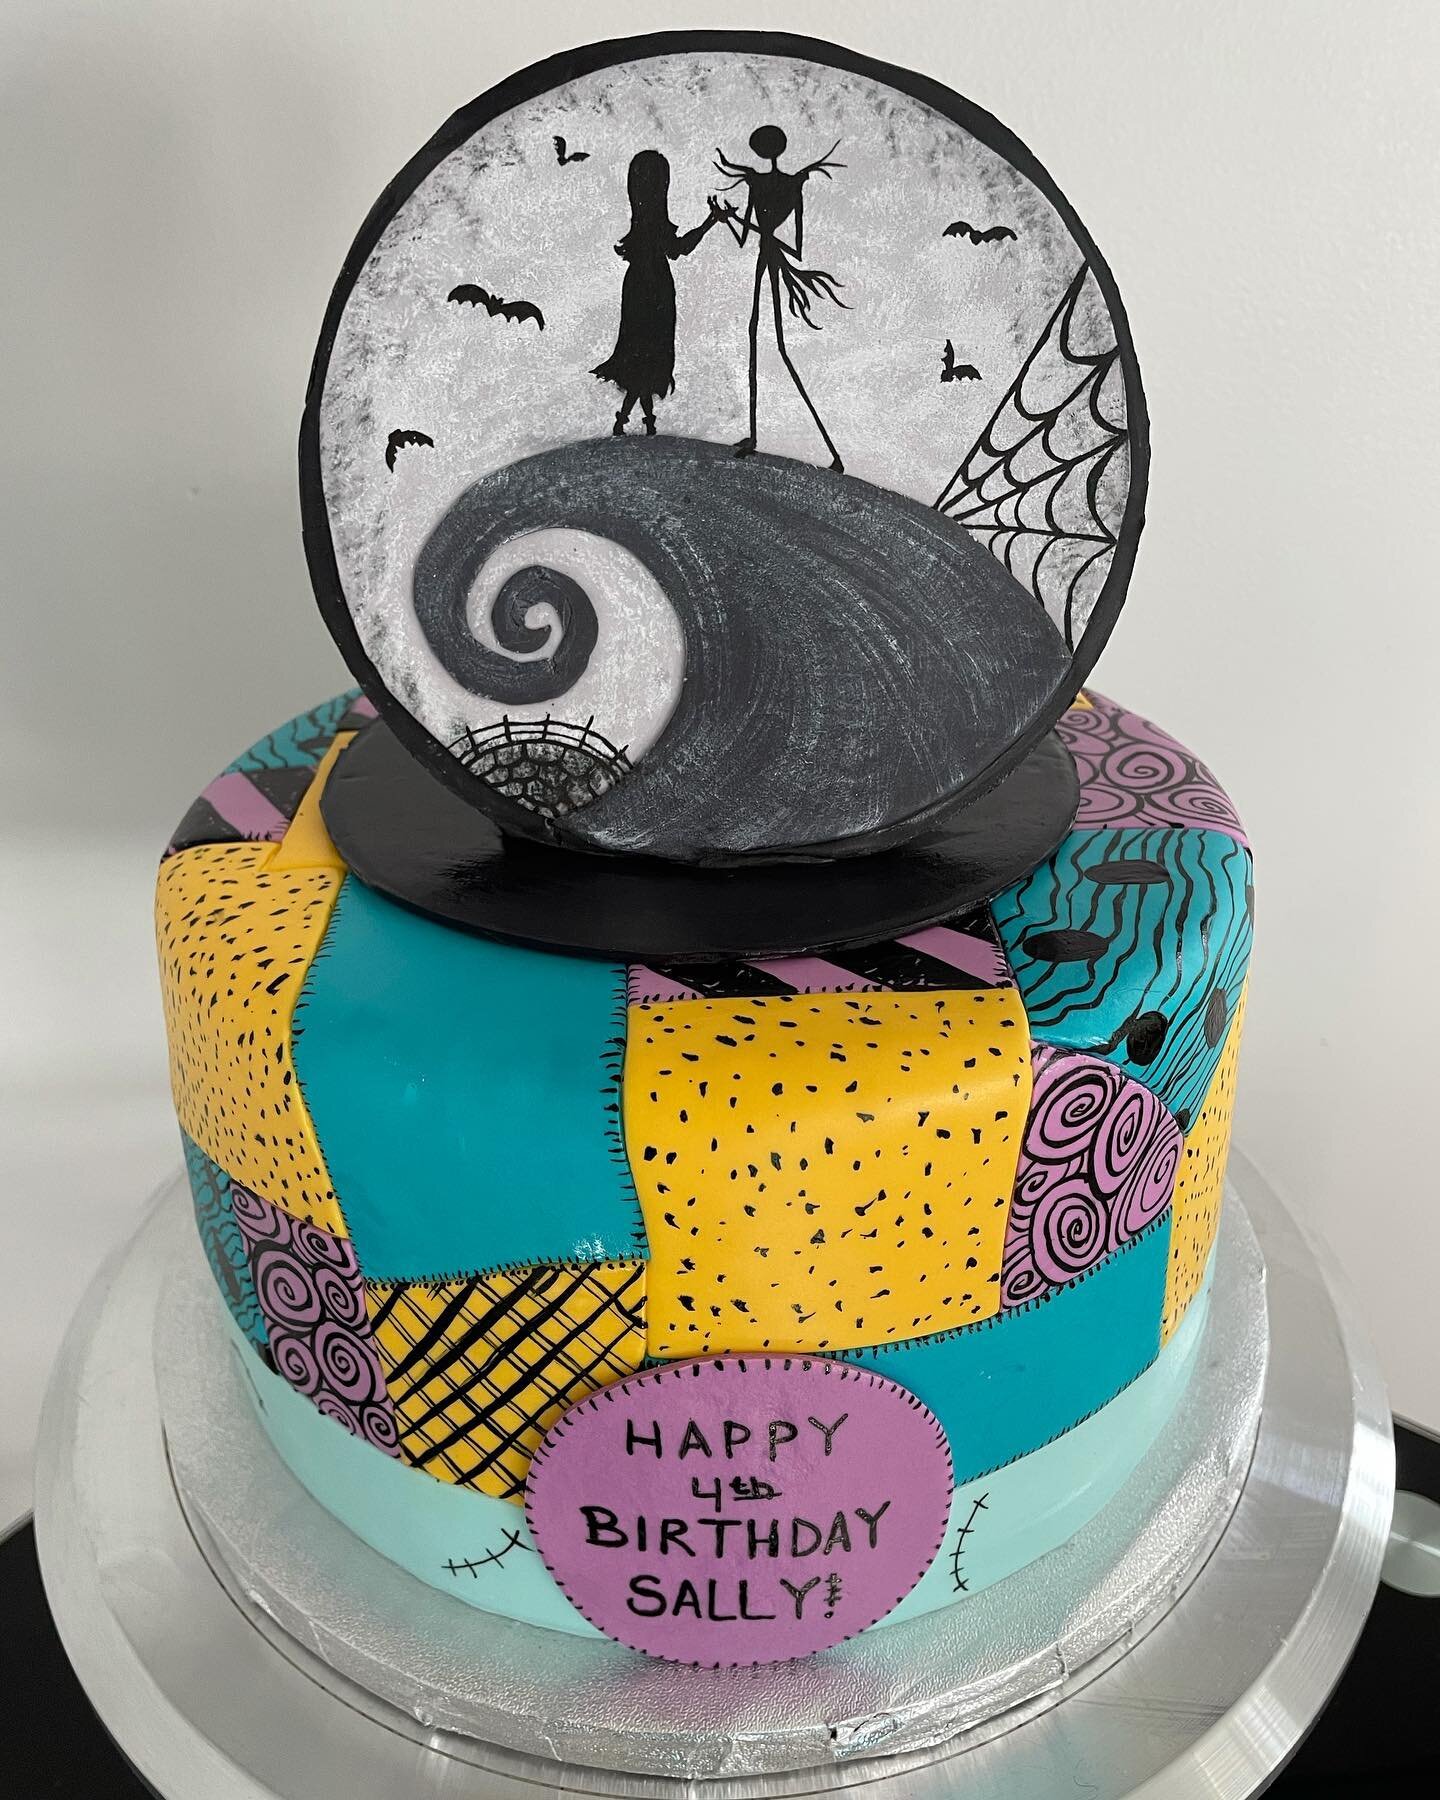 Sallys dress pattern stole the show in our #nightmarebeforechristmas cakey today. Chocolate buttermilk cake, white chocolate ganache, cookies and cream buttercream, with our marshmallow fondant covering. All cake and topper deco was hand sculpted, pa